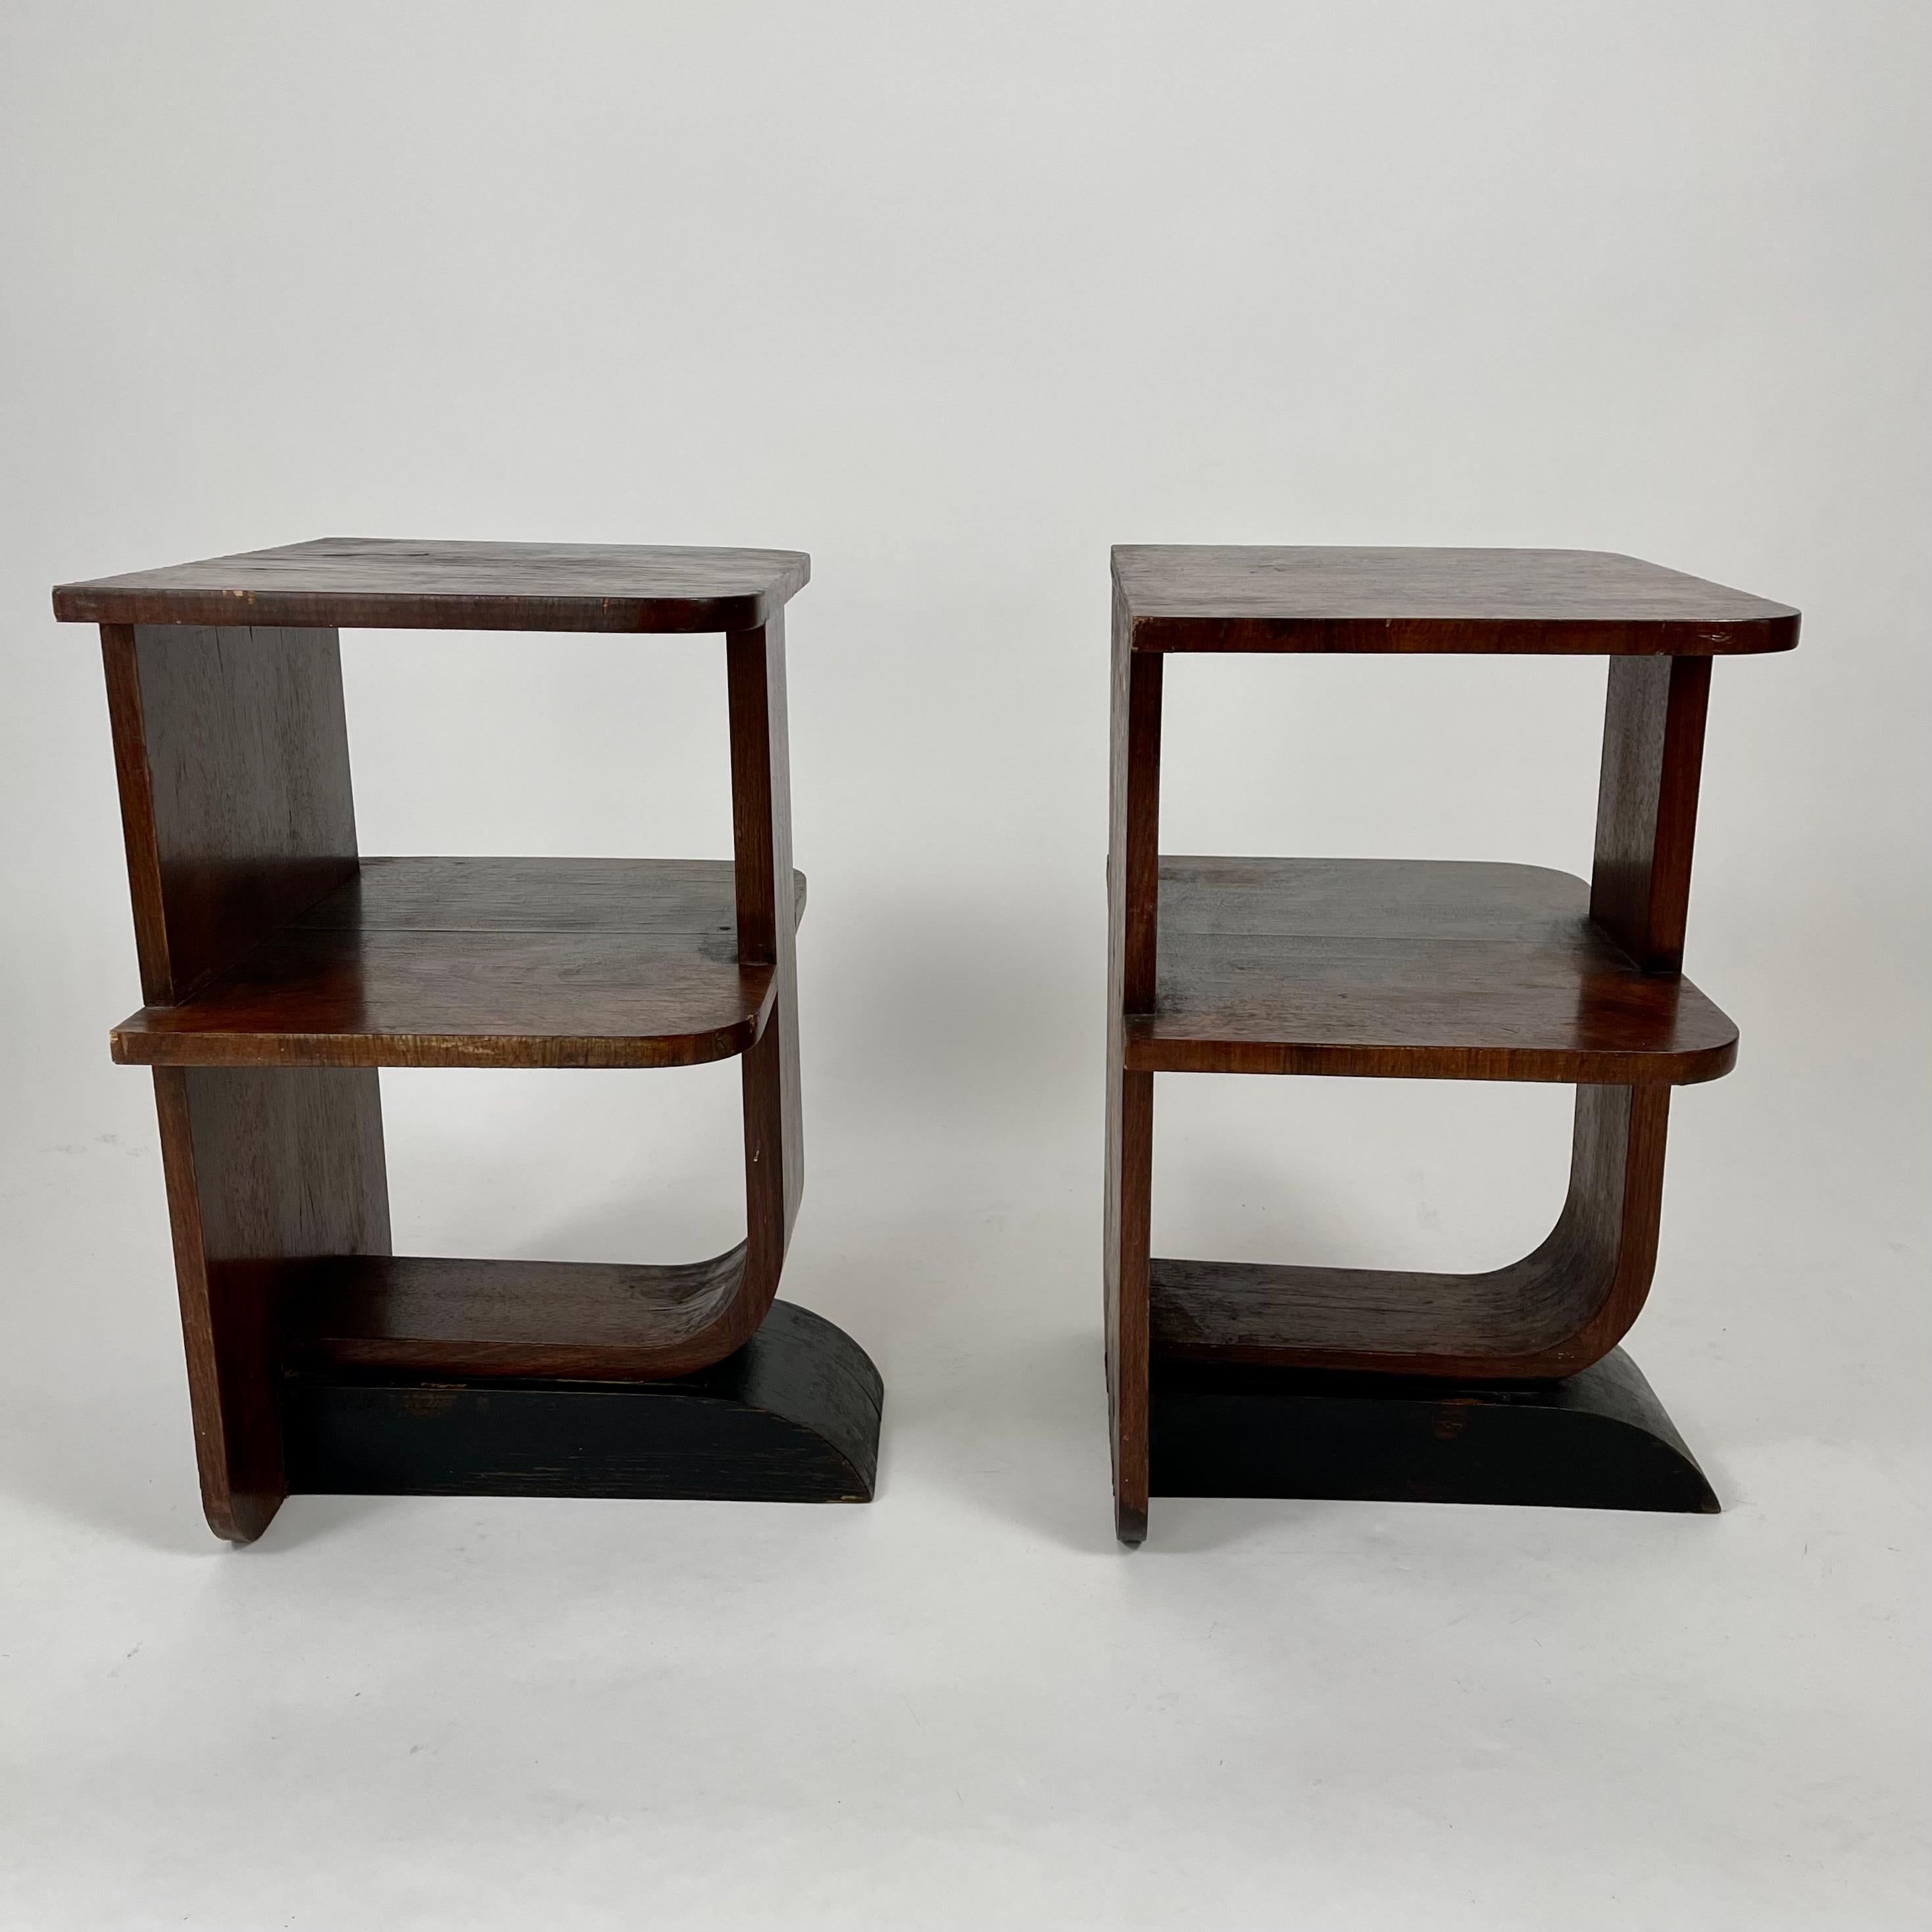 Ebonized Pair of Small Art Deco End Tables with Shelves